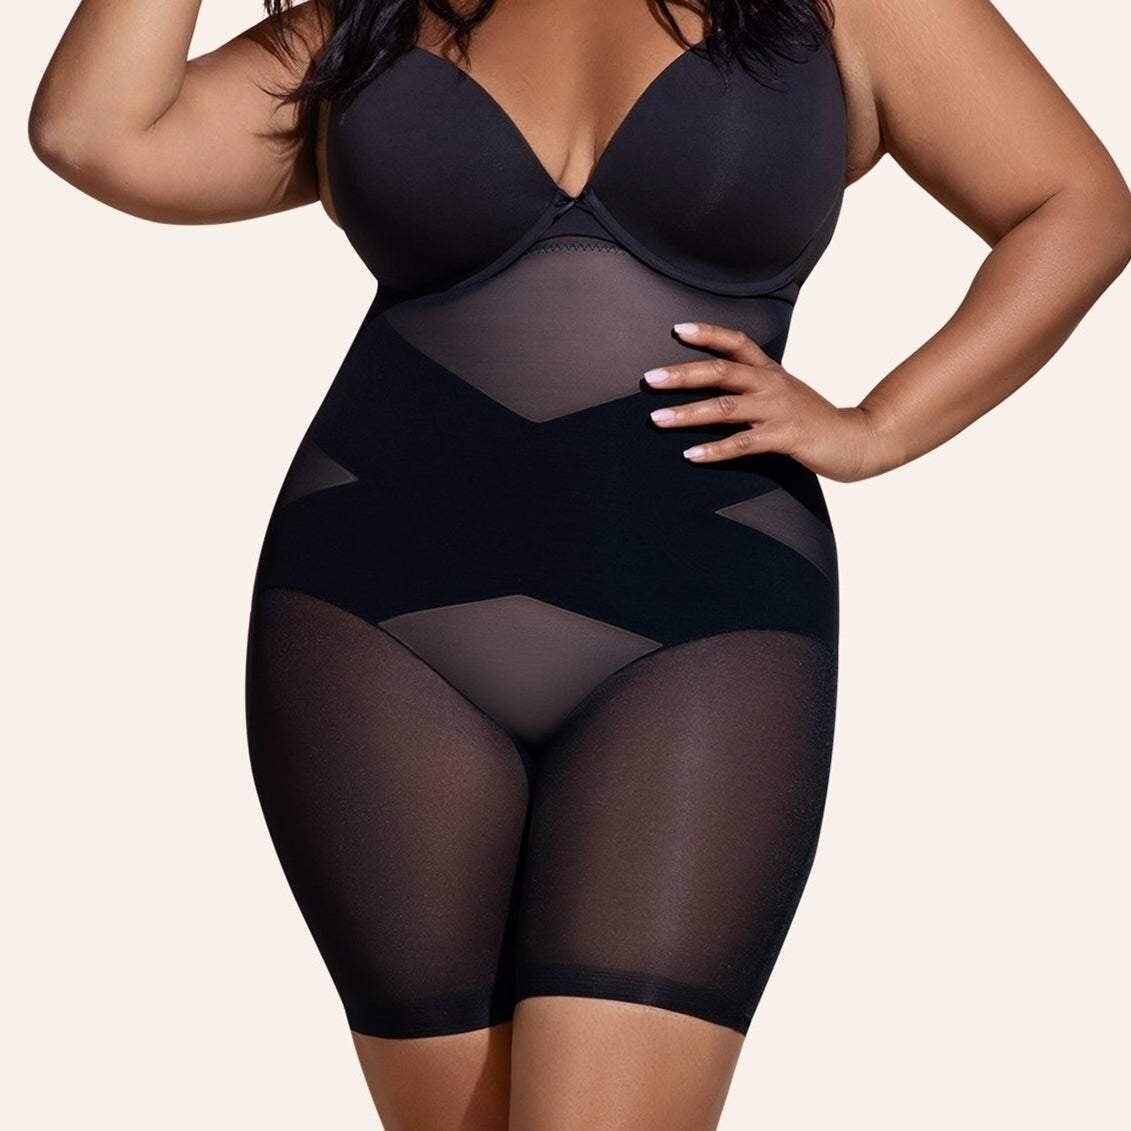 🔥SUMMER HOT SALE - 49% OFF🔥New Cross Compression High Waisted Shaper